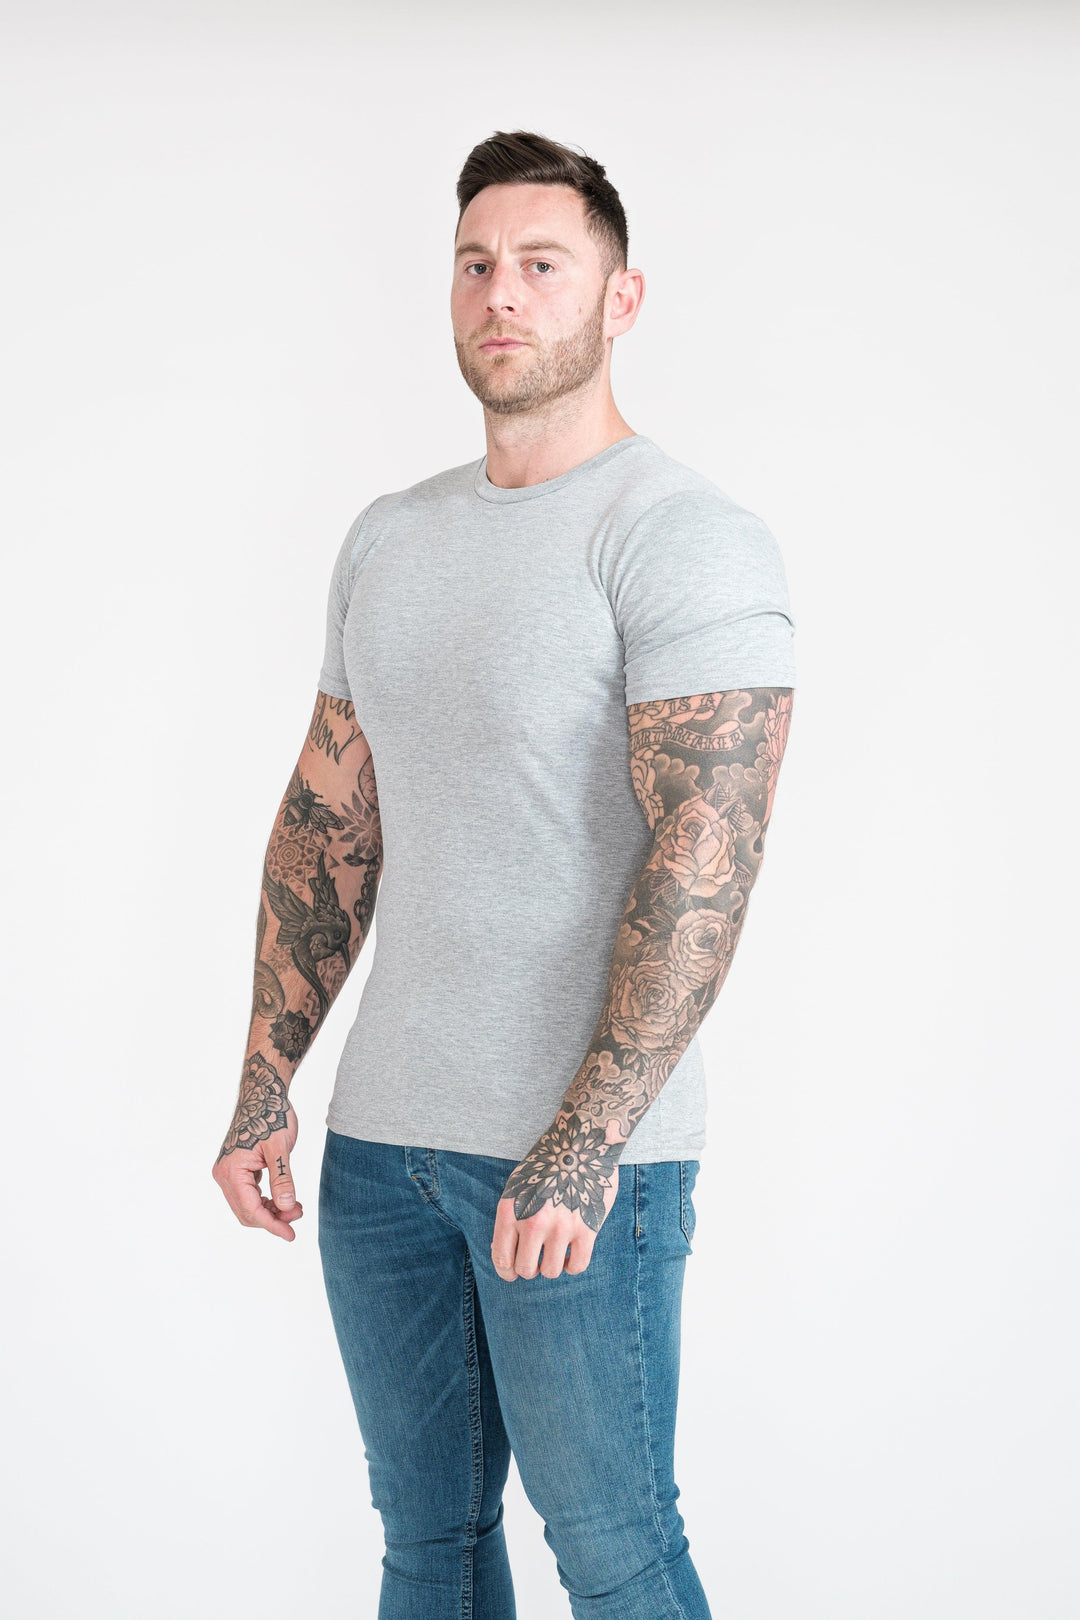 Grey Tapered Fit T-Shirt For Men. A Proportionally Fitted and Muscle Fit T-Shirt. The best t shirt for muscular guys.